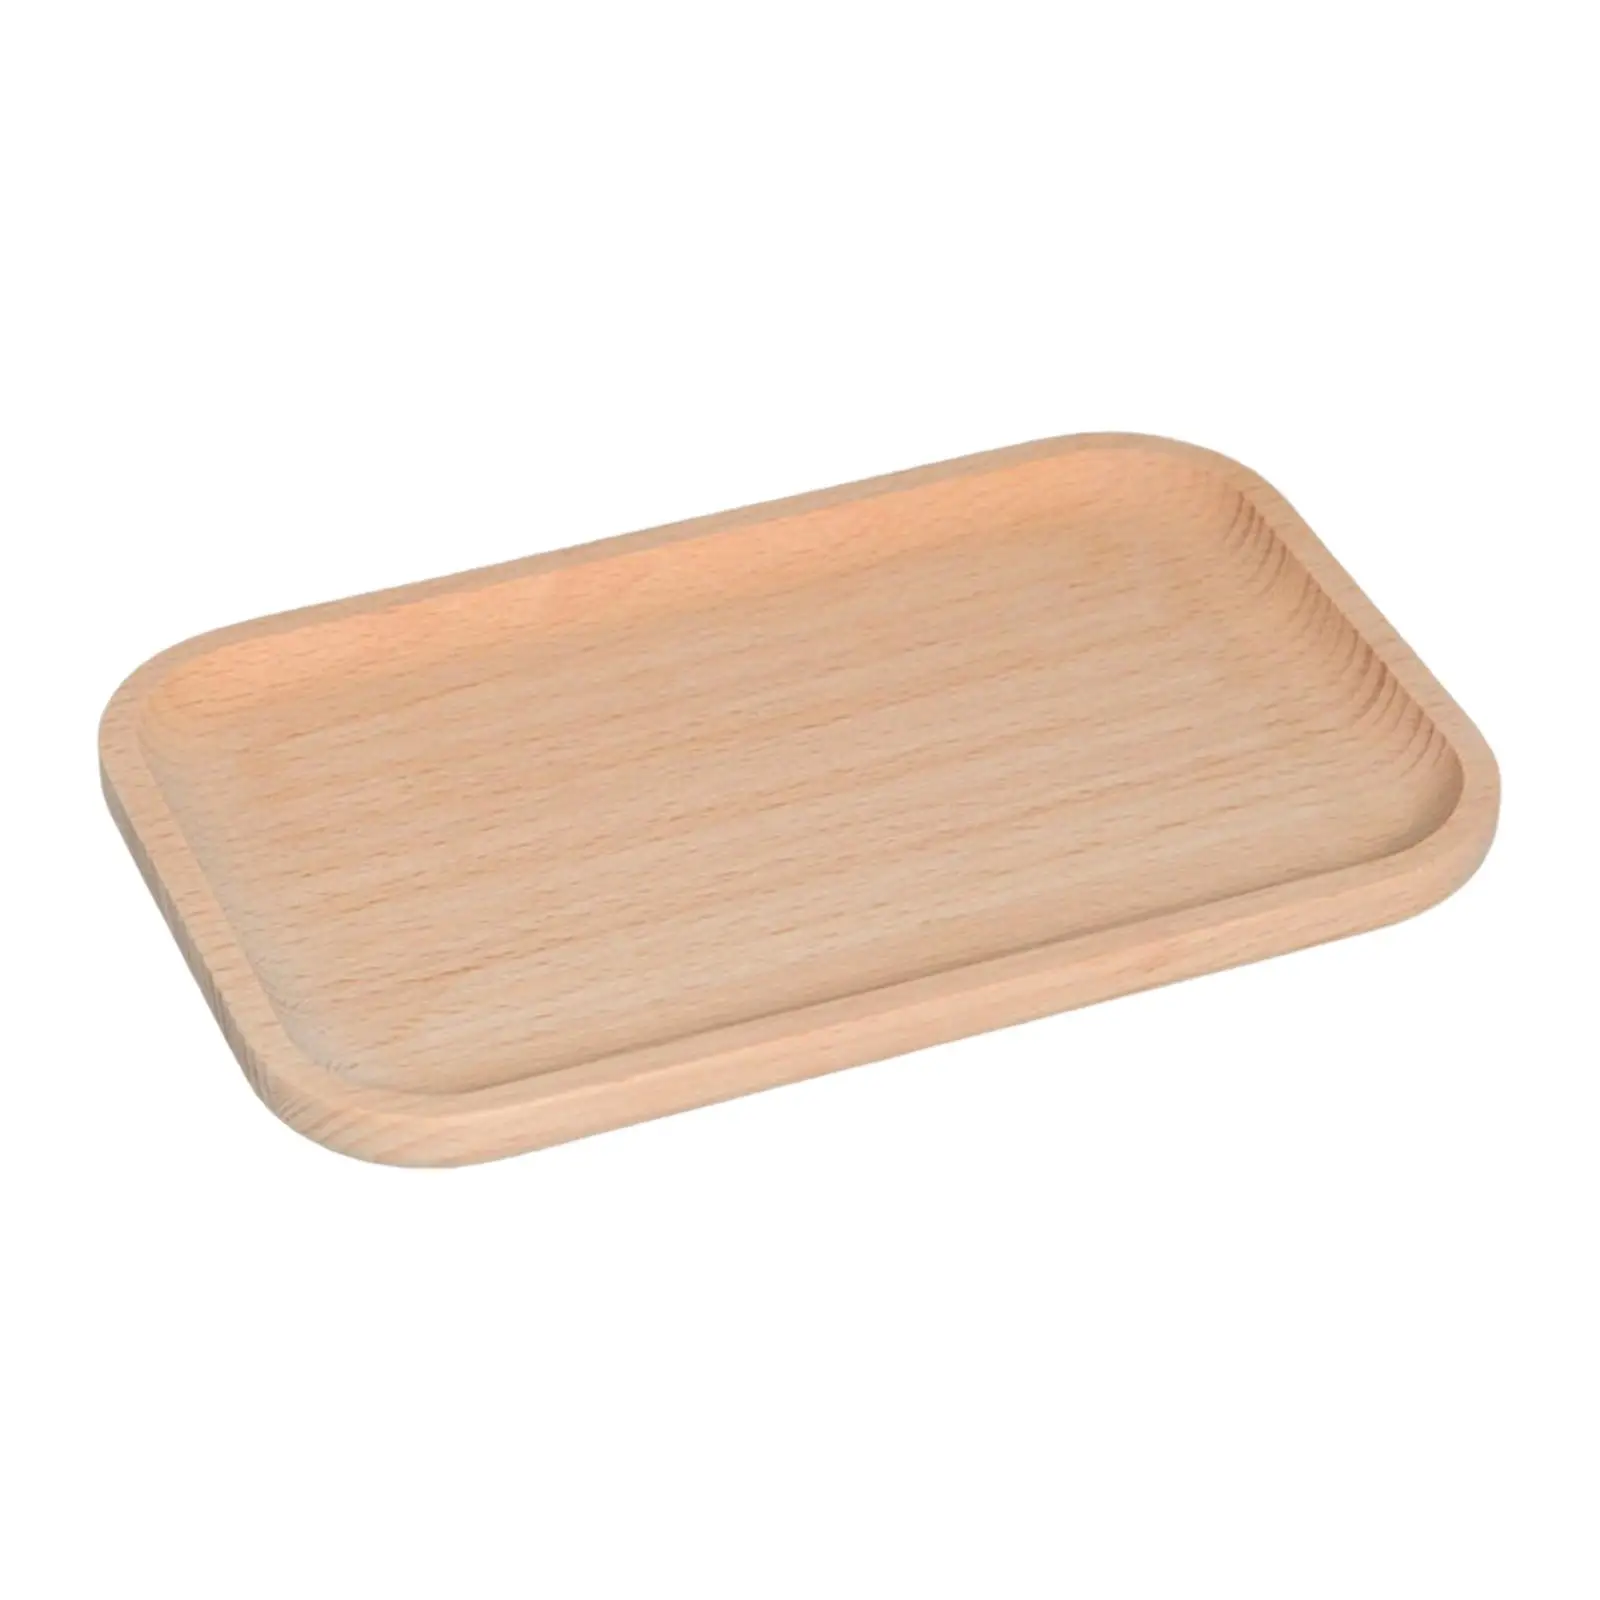 Wooden Serving Tray Snack Tray Fruit Plate Household Premium Japanese Style for